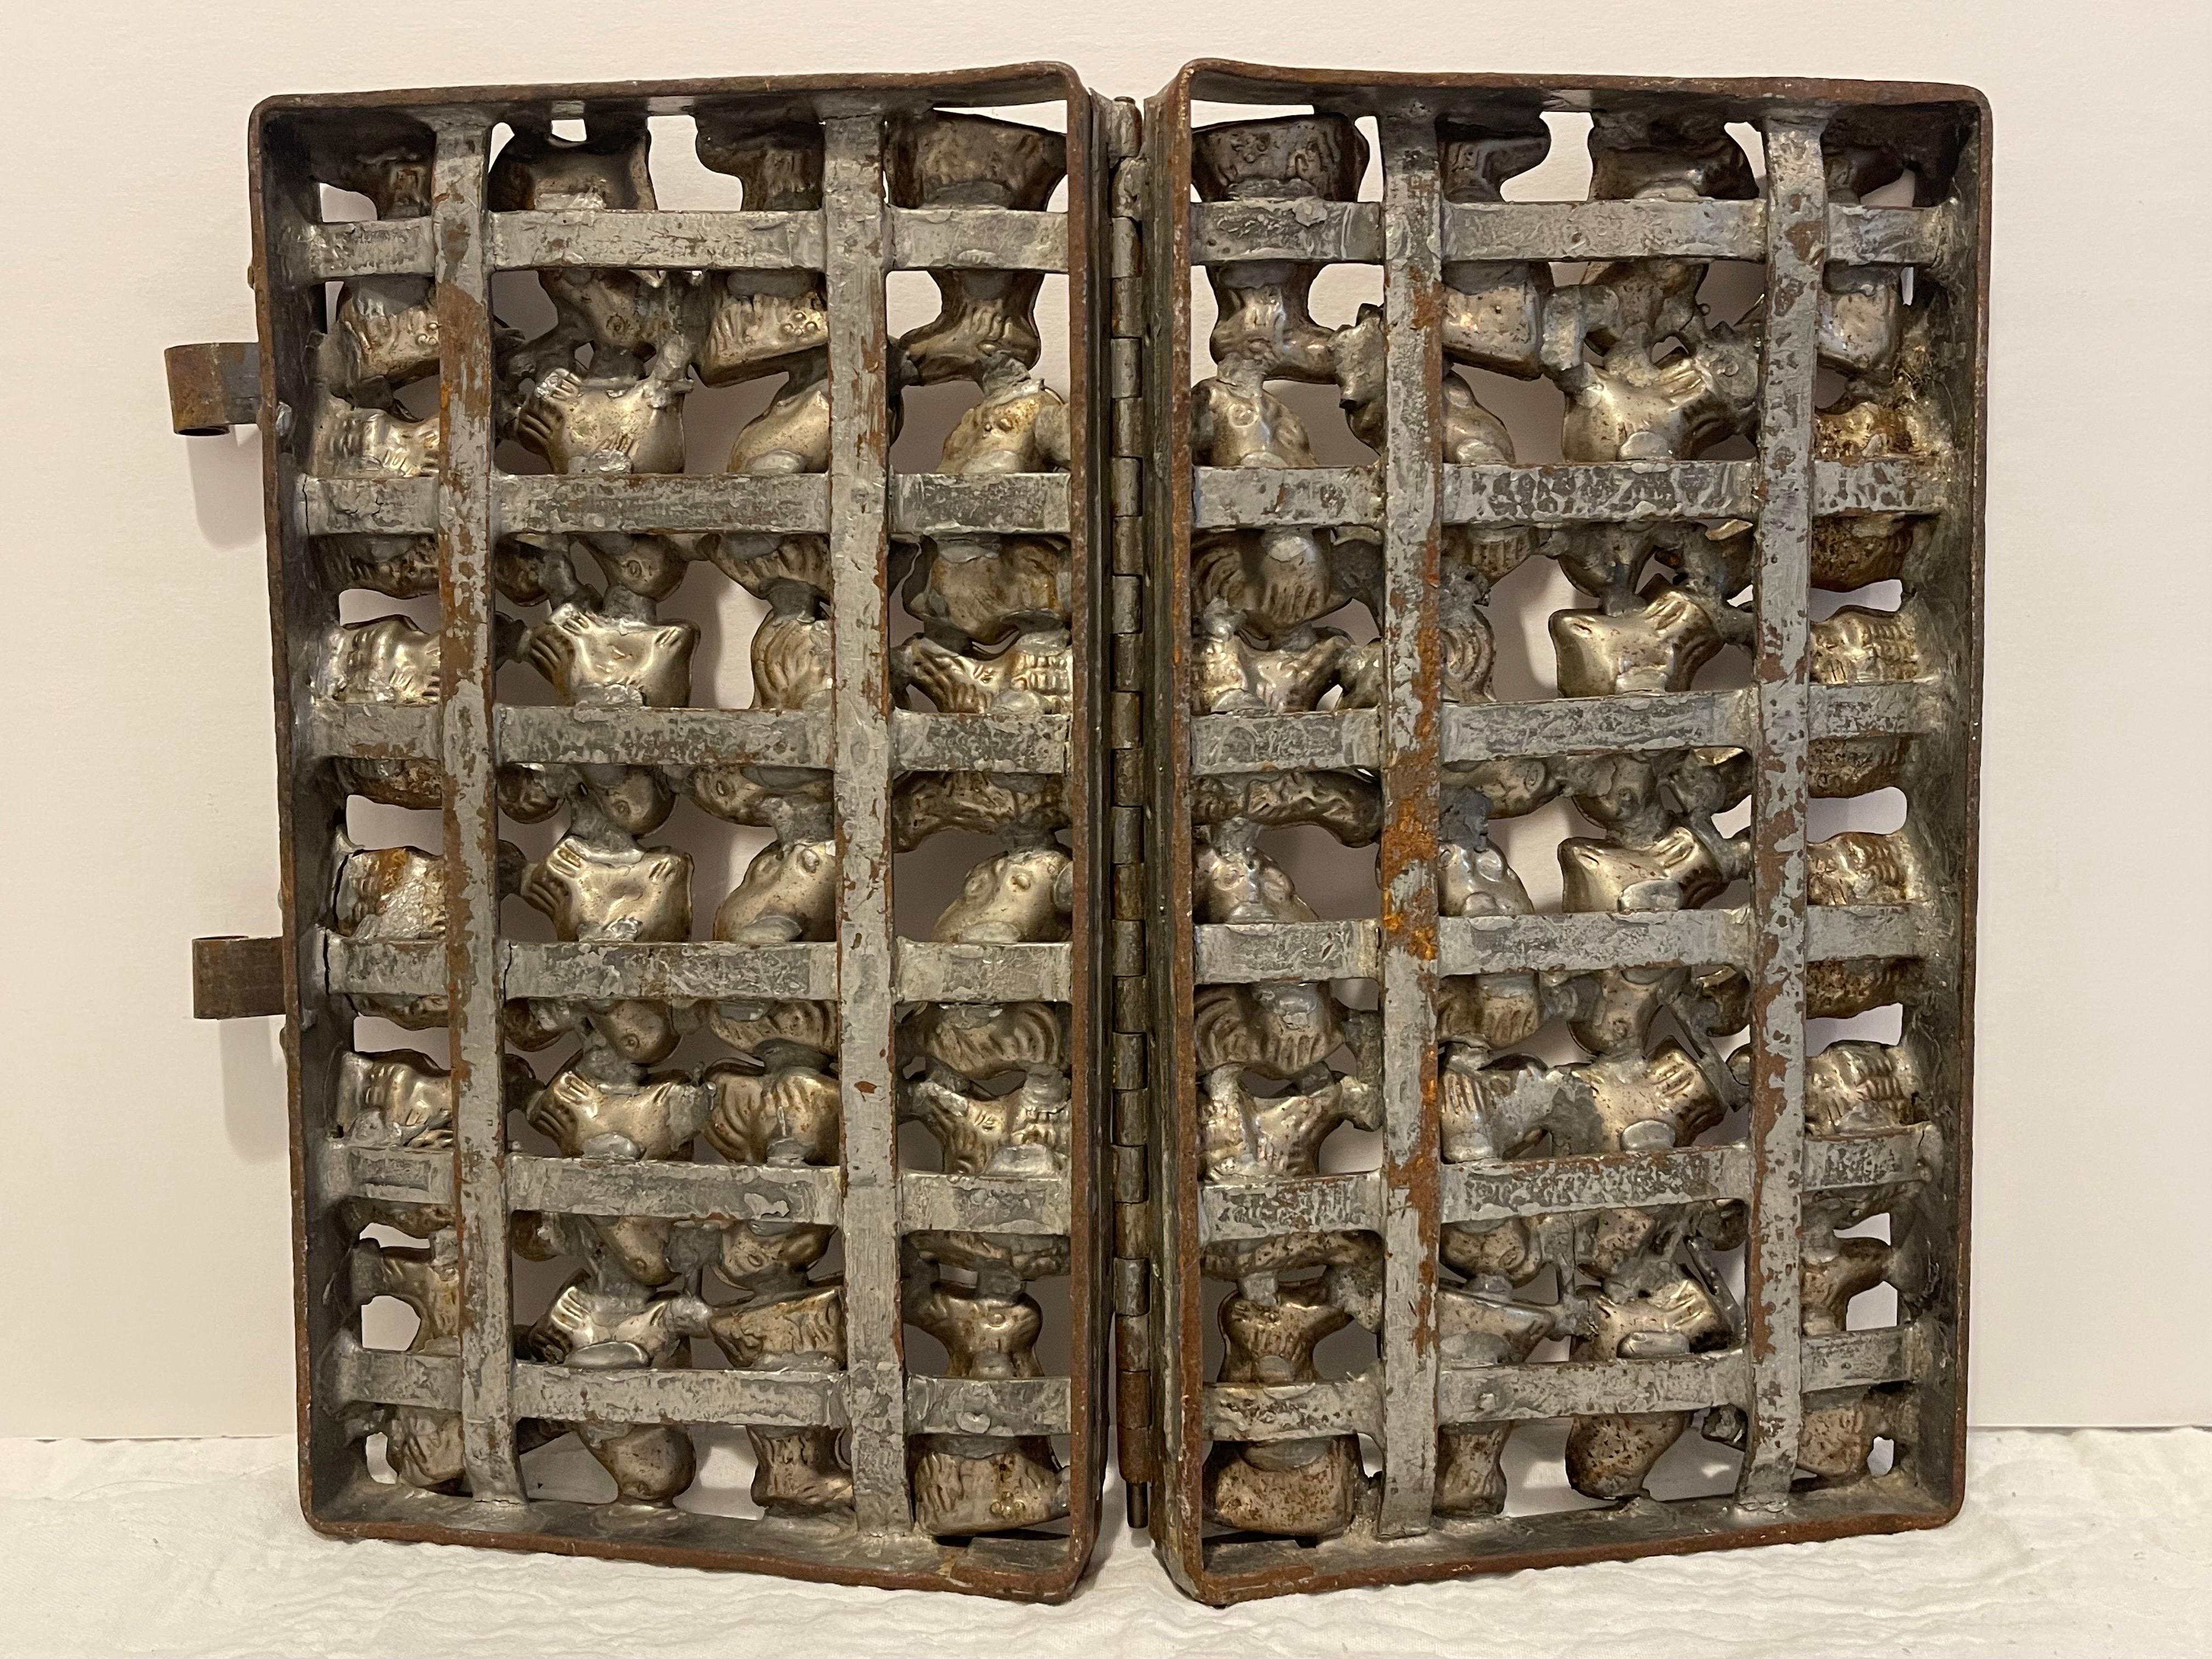 Large Antique German Chocolate Mold with Bunnies and Chickens. Nice hinged double door German chocolate mold. The molds themselves have bunnies and hens. Nice Patina to this beauty.